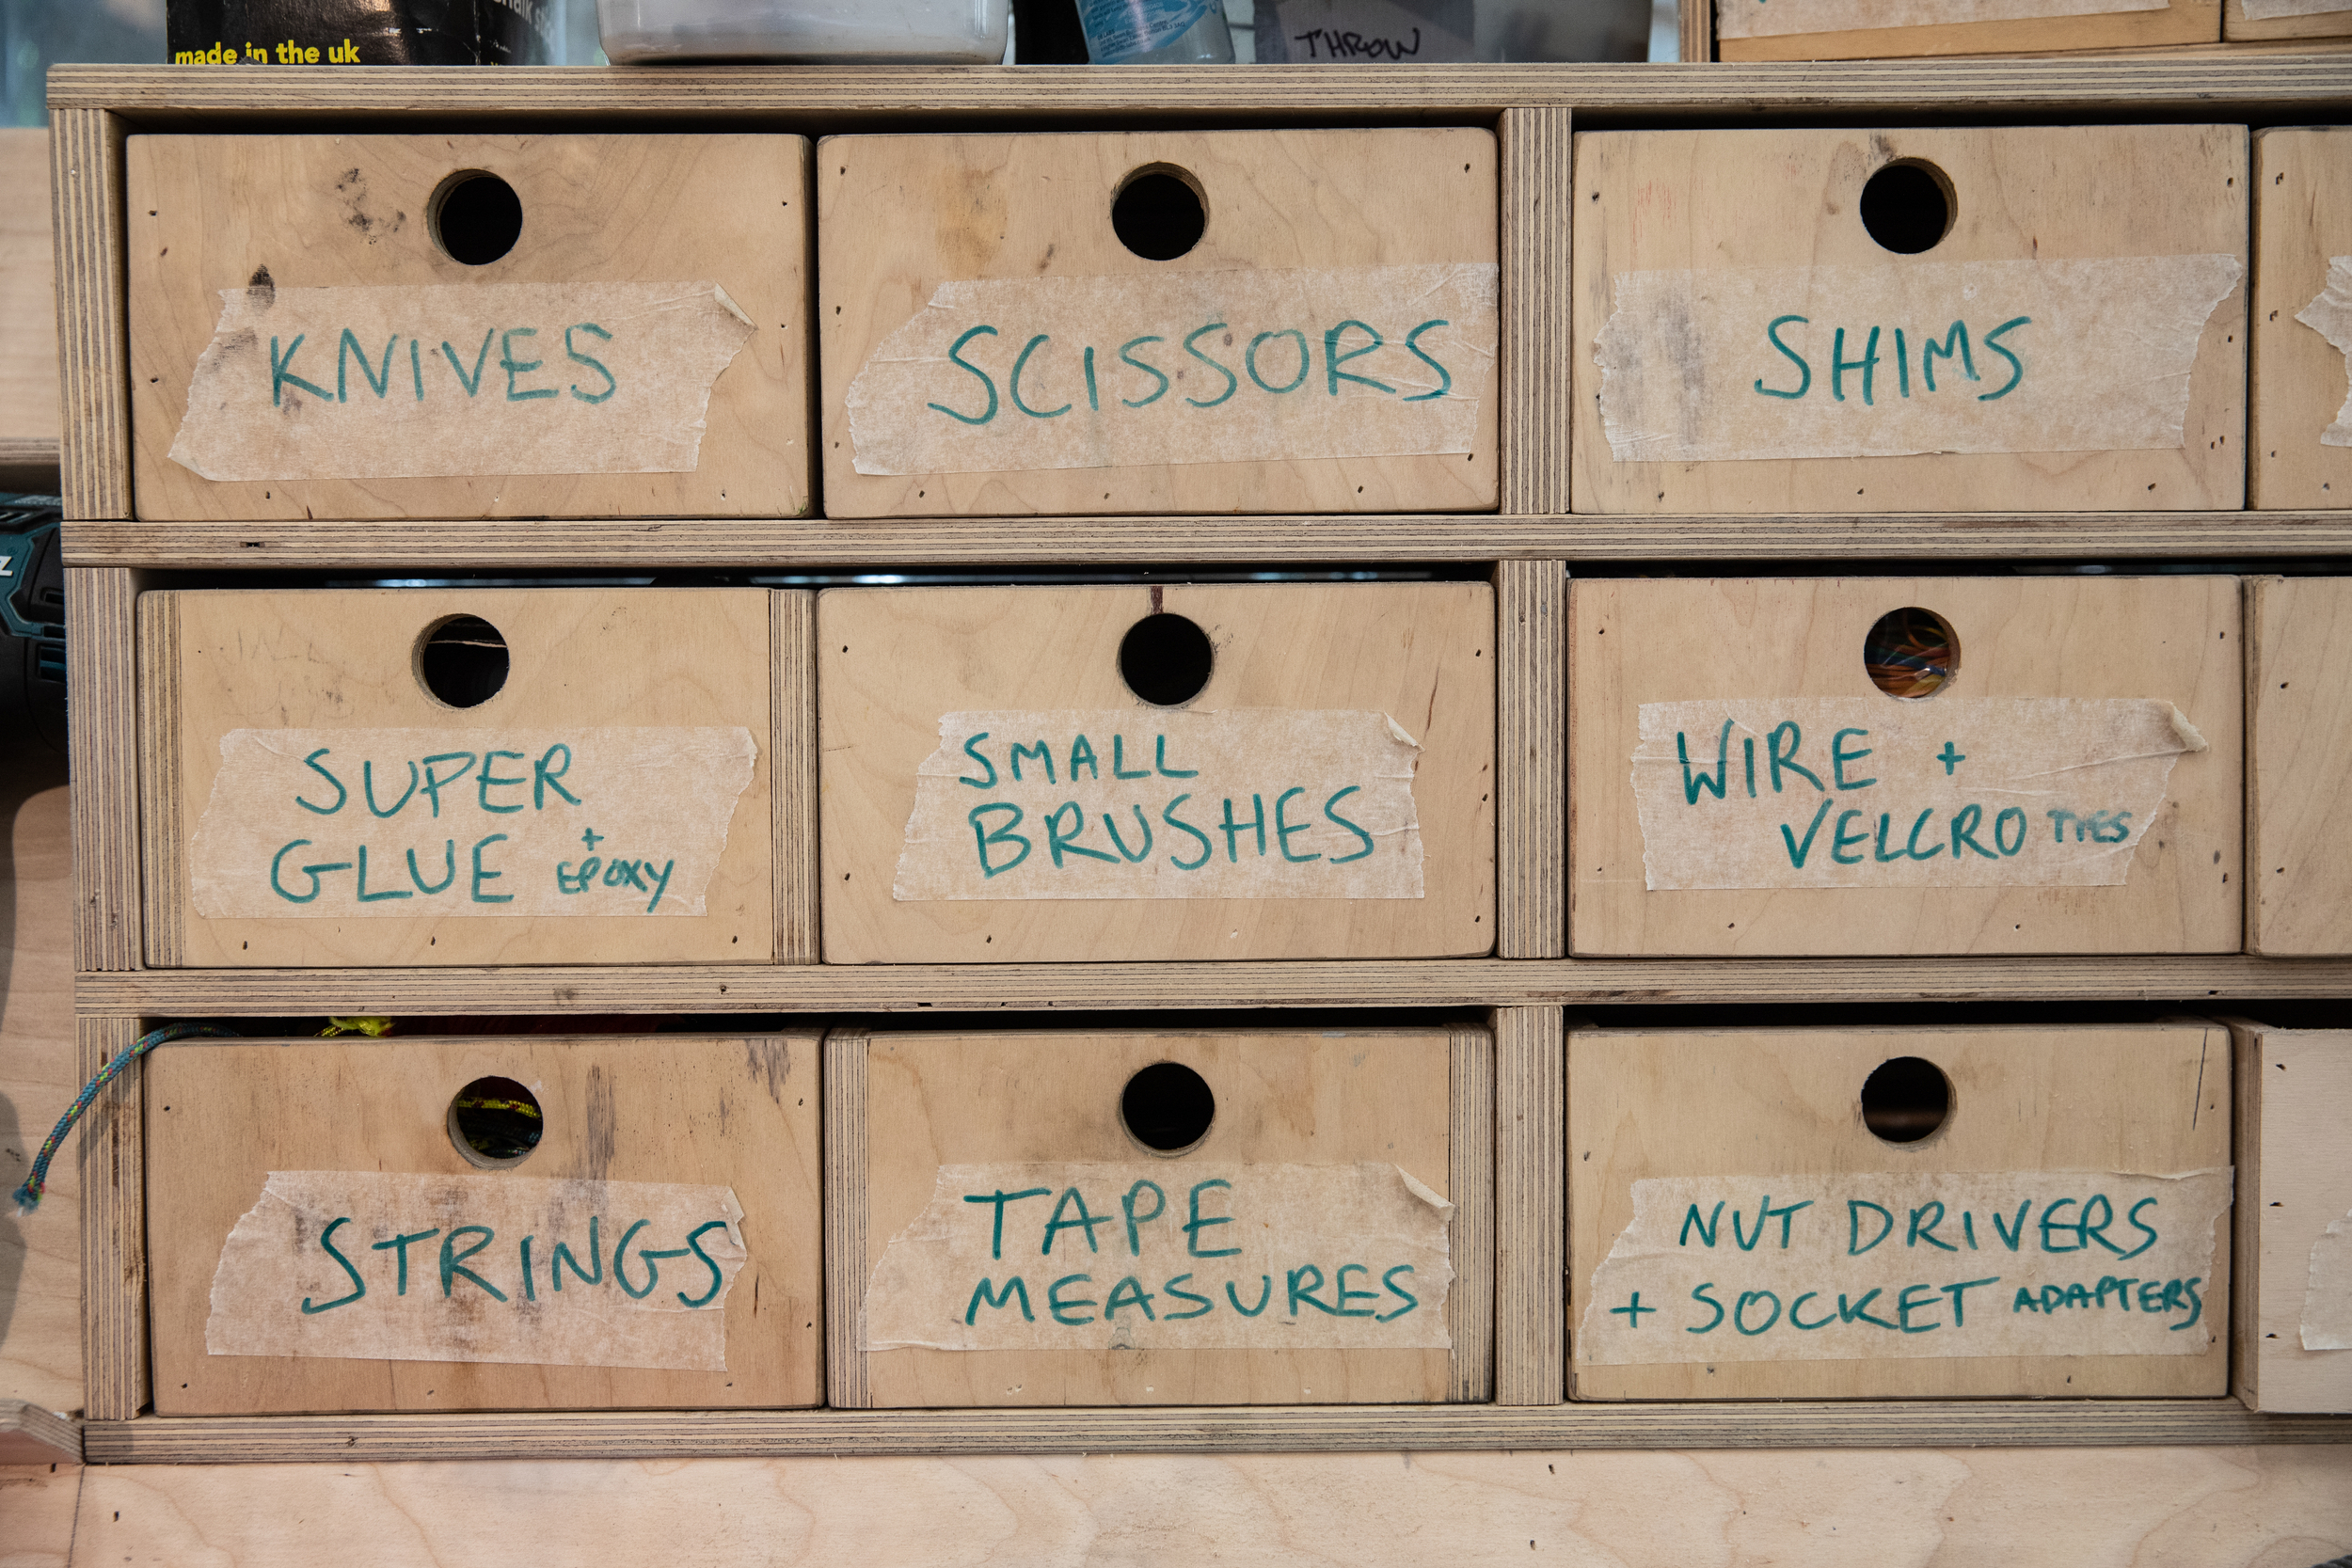 Small wooden drawers with masking tape labels indicating contents including knives, small brushes, tape measures etc